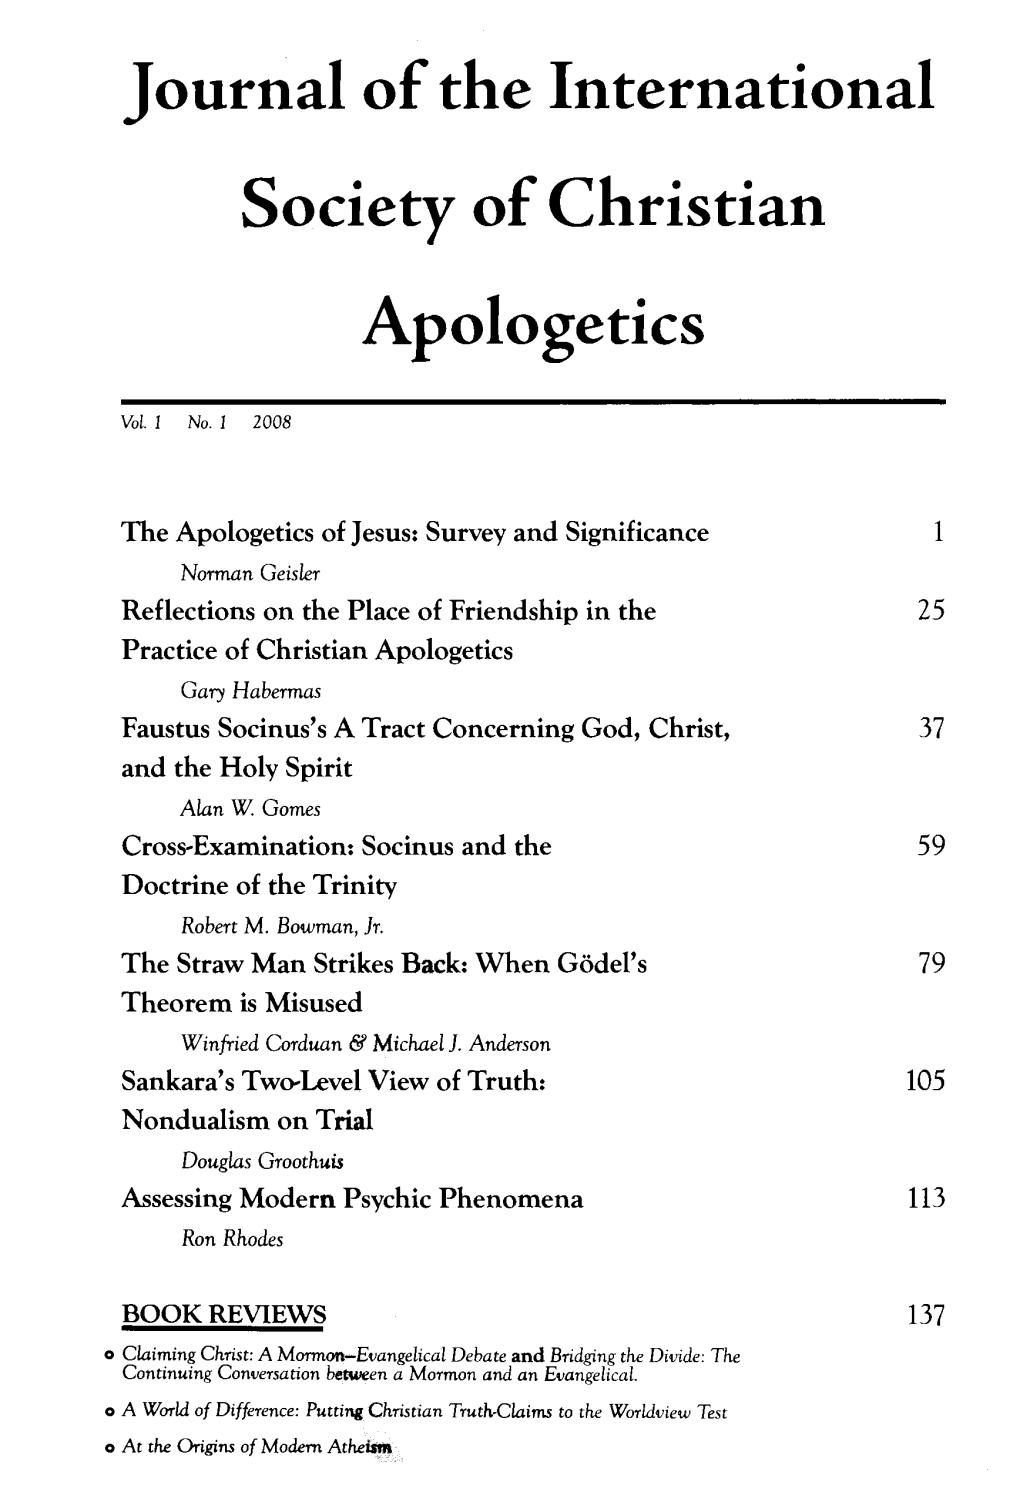 Journal of the International Society of Christian Apologetics